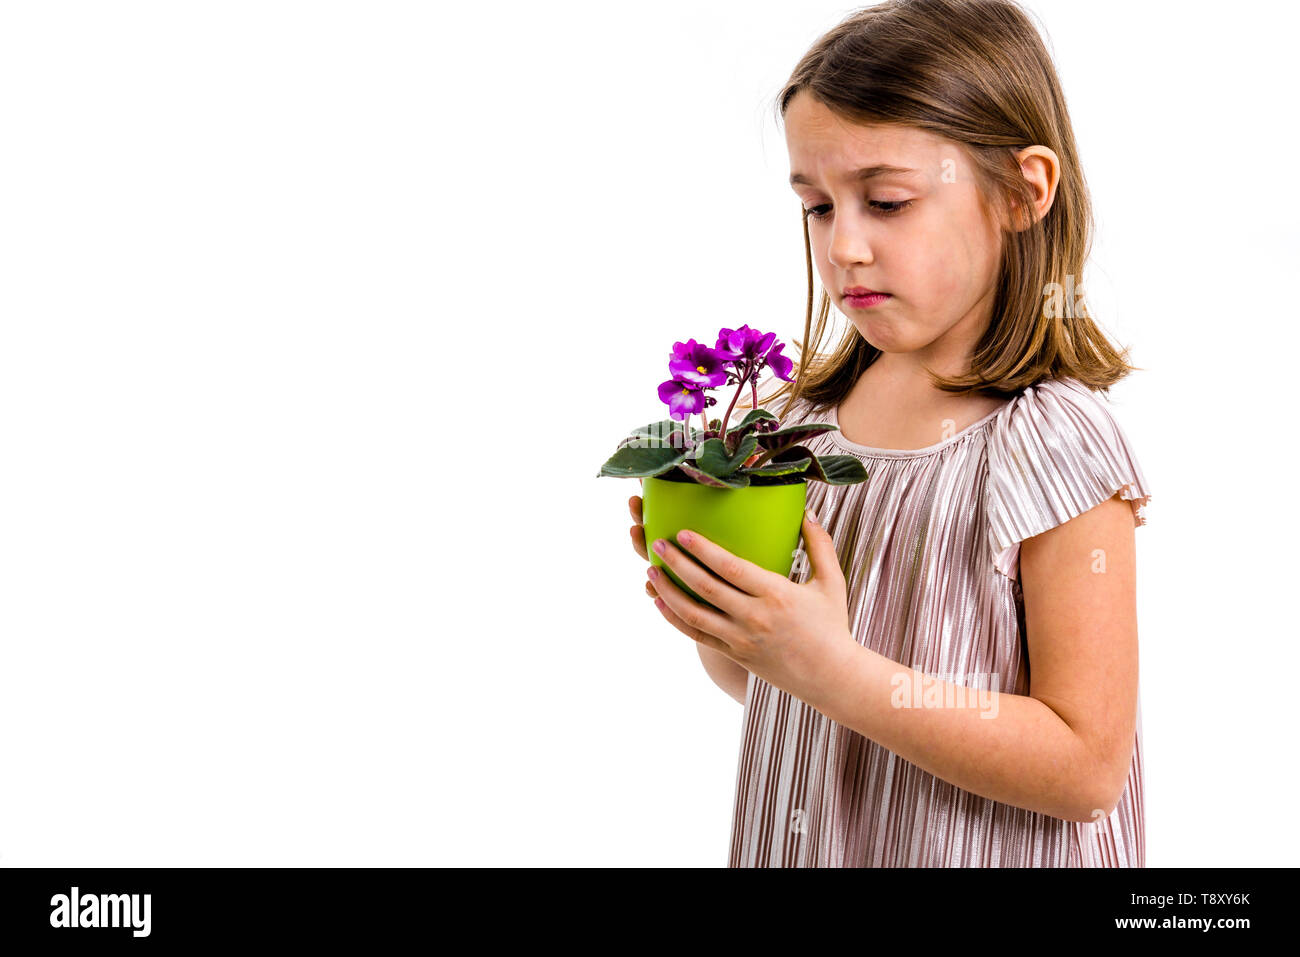 Sad young little girl holding flower pot mourning family loss. Child grieving over losing loved ones. Girl looking at flower pot, sad face, crying. Pr Stock Photo